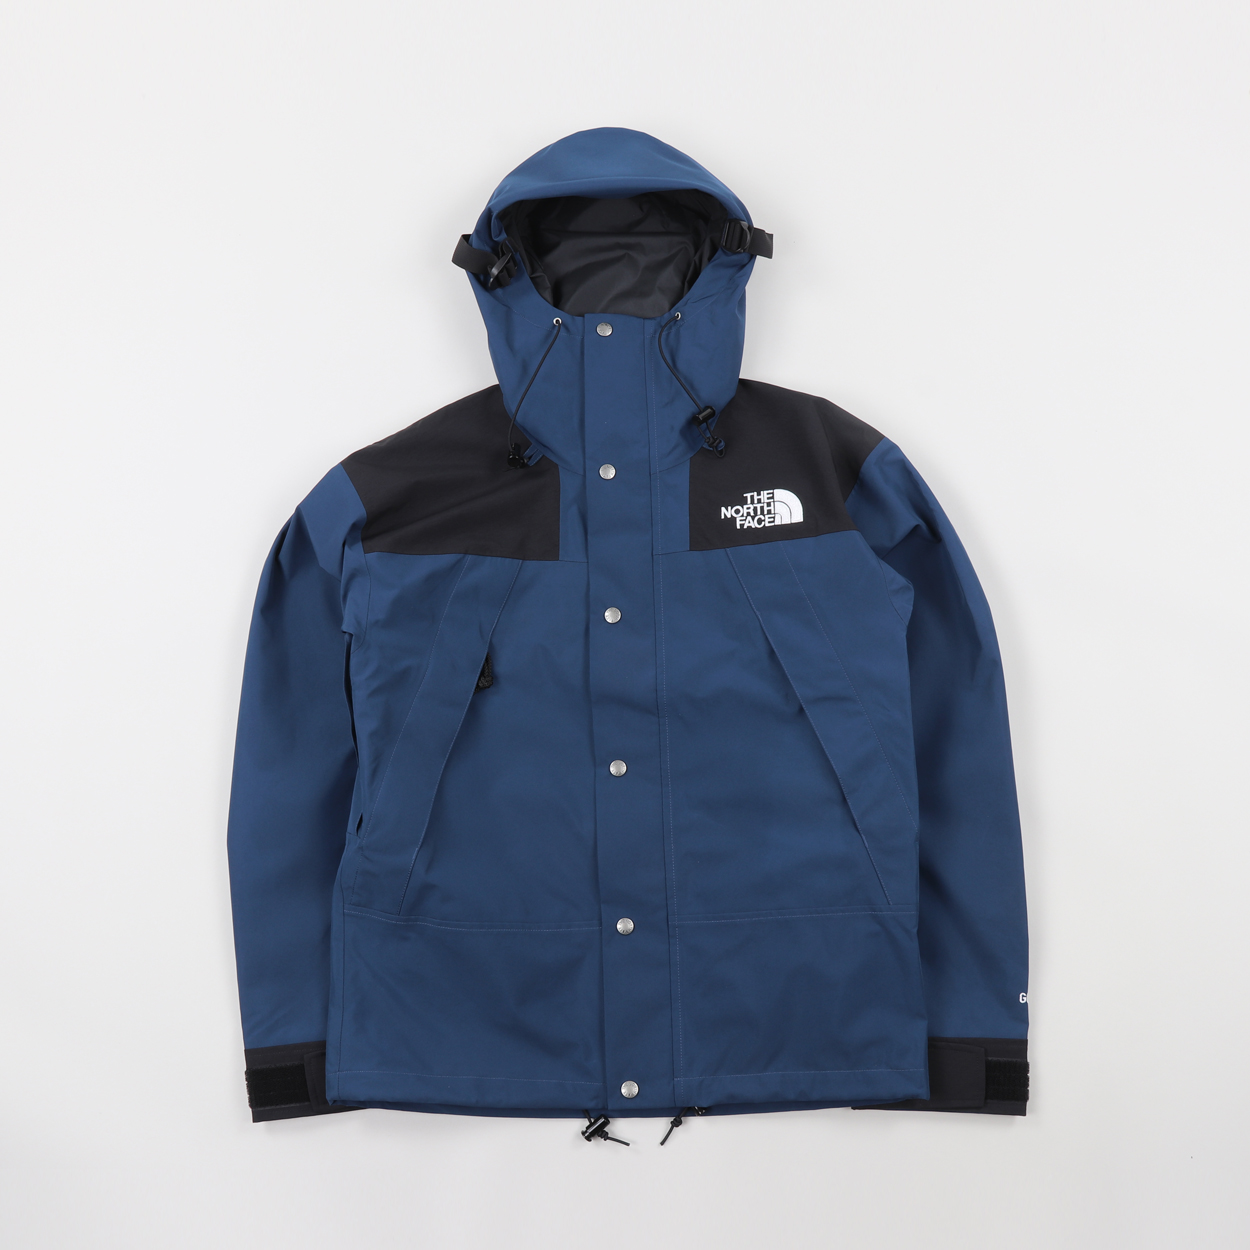 north face mountain jacket gore tex